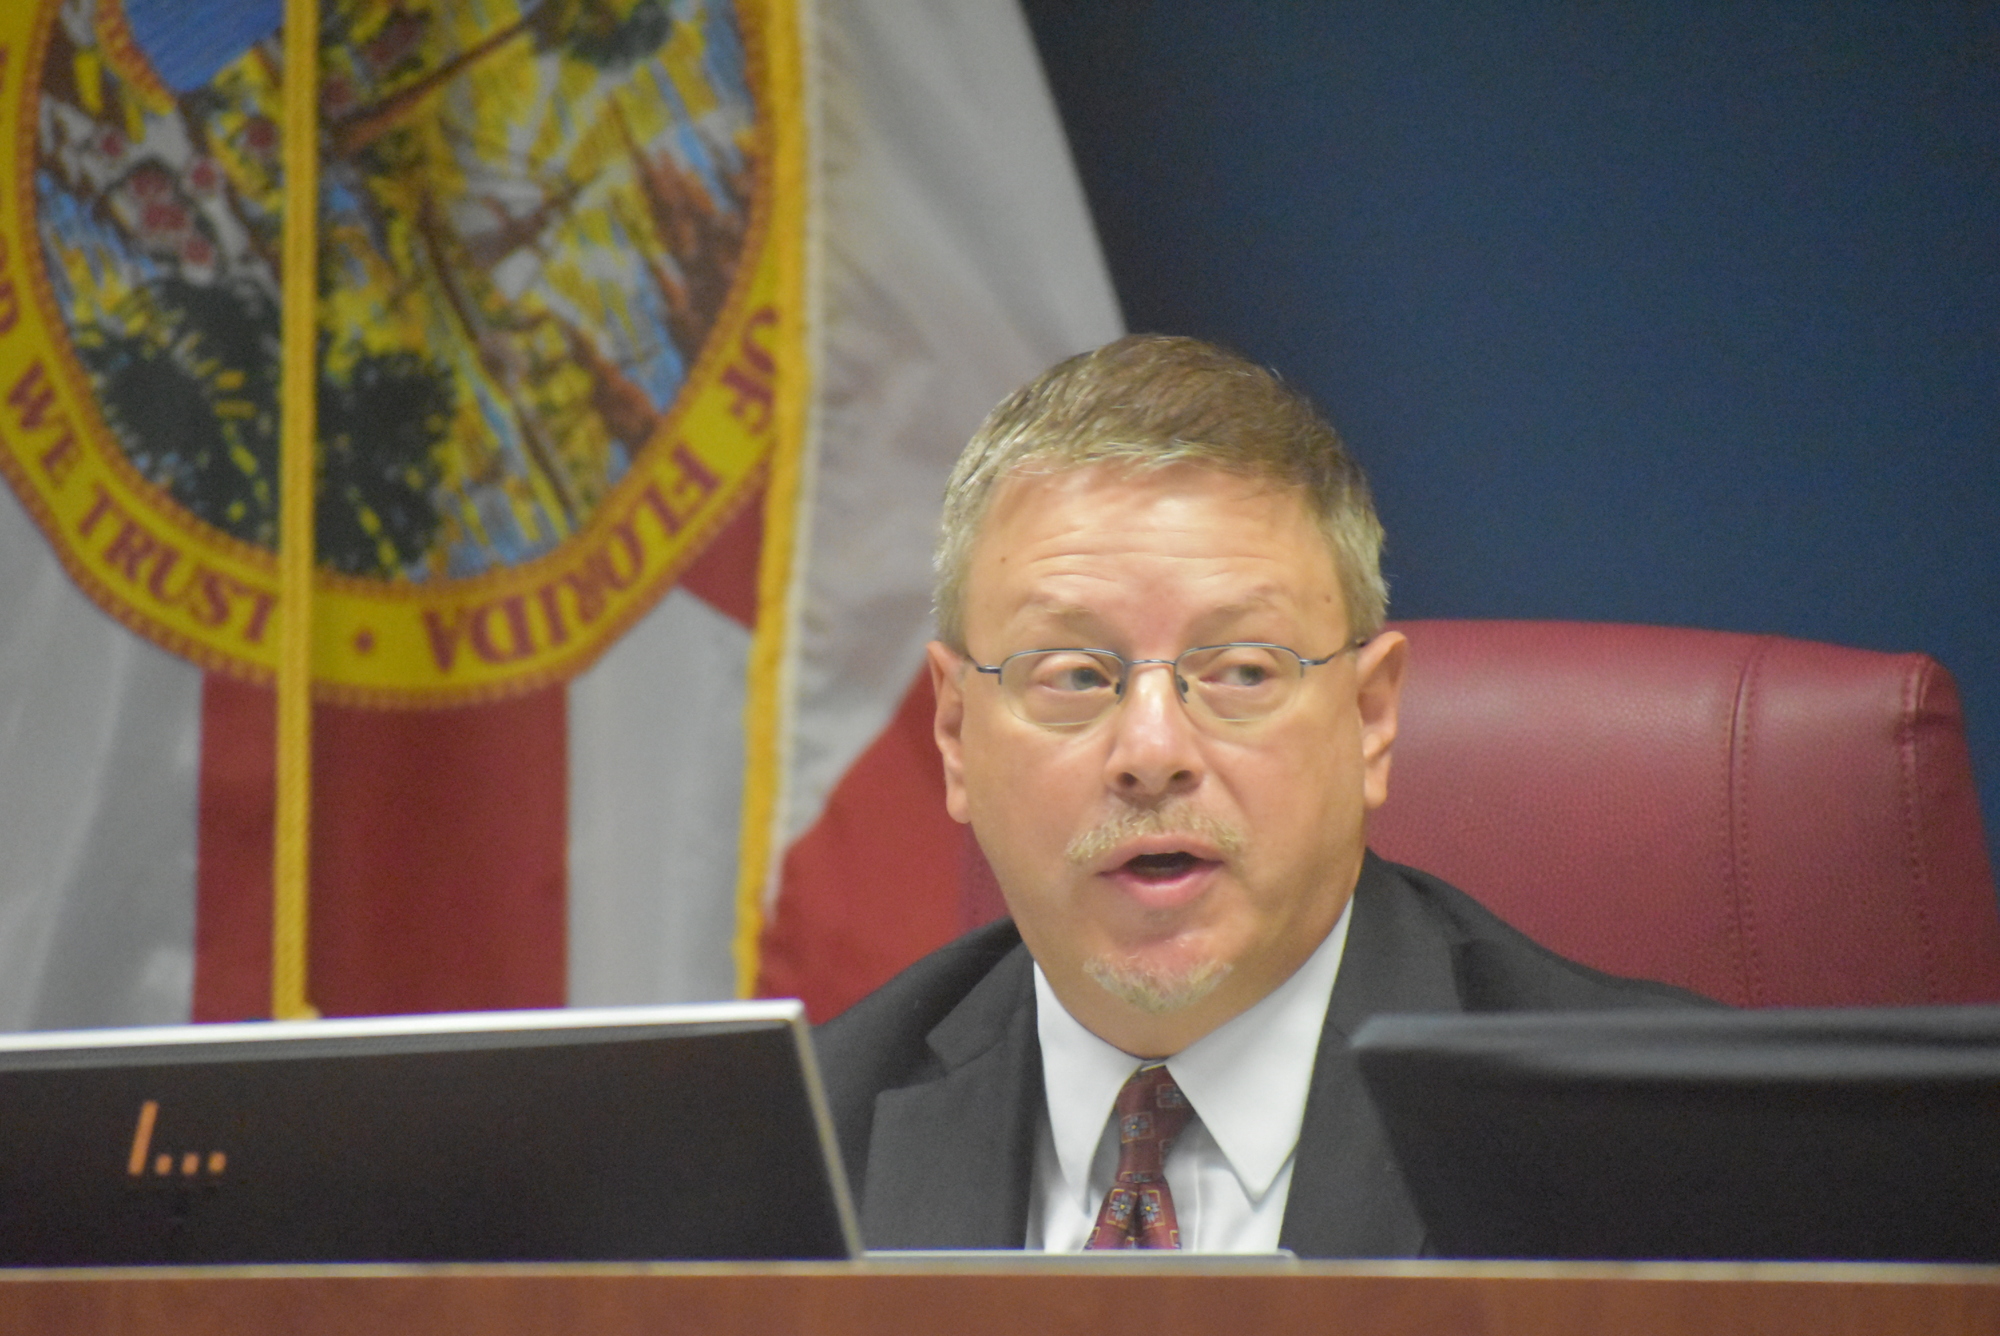 Manatee County Attorney Bill Clague advised commissioners to approve county payment of settlements and attorney fees in public record lawsuits involving Commissioners James Satcher and Kevin Van Ostenbridge.